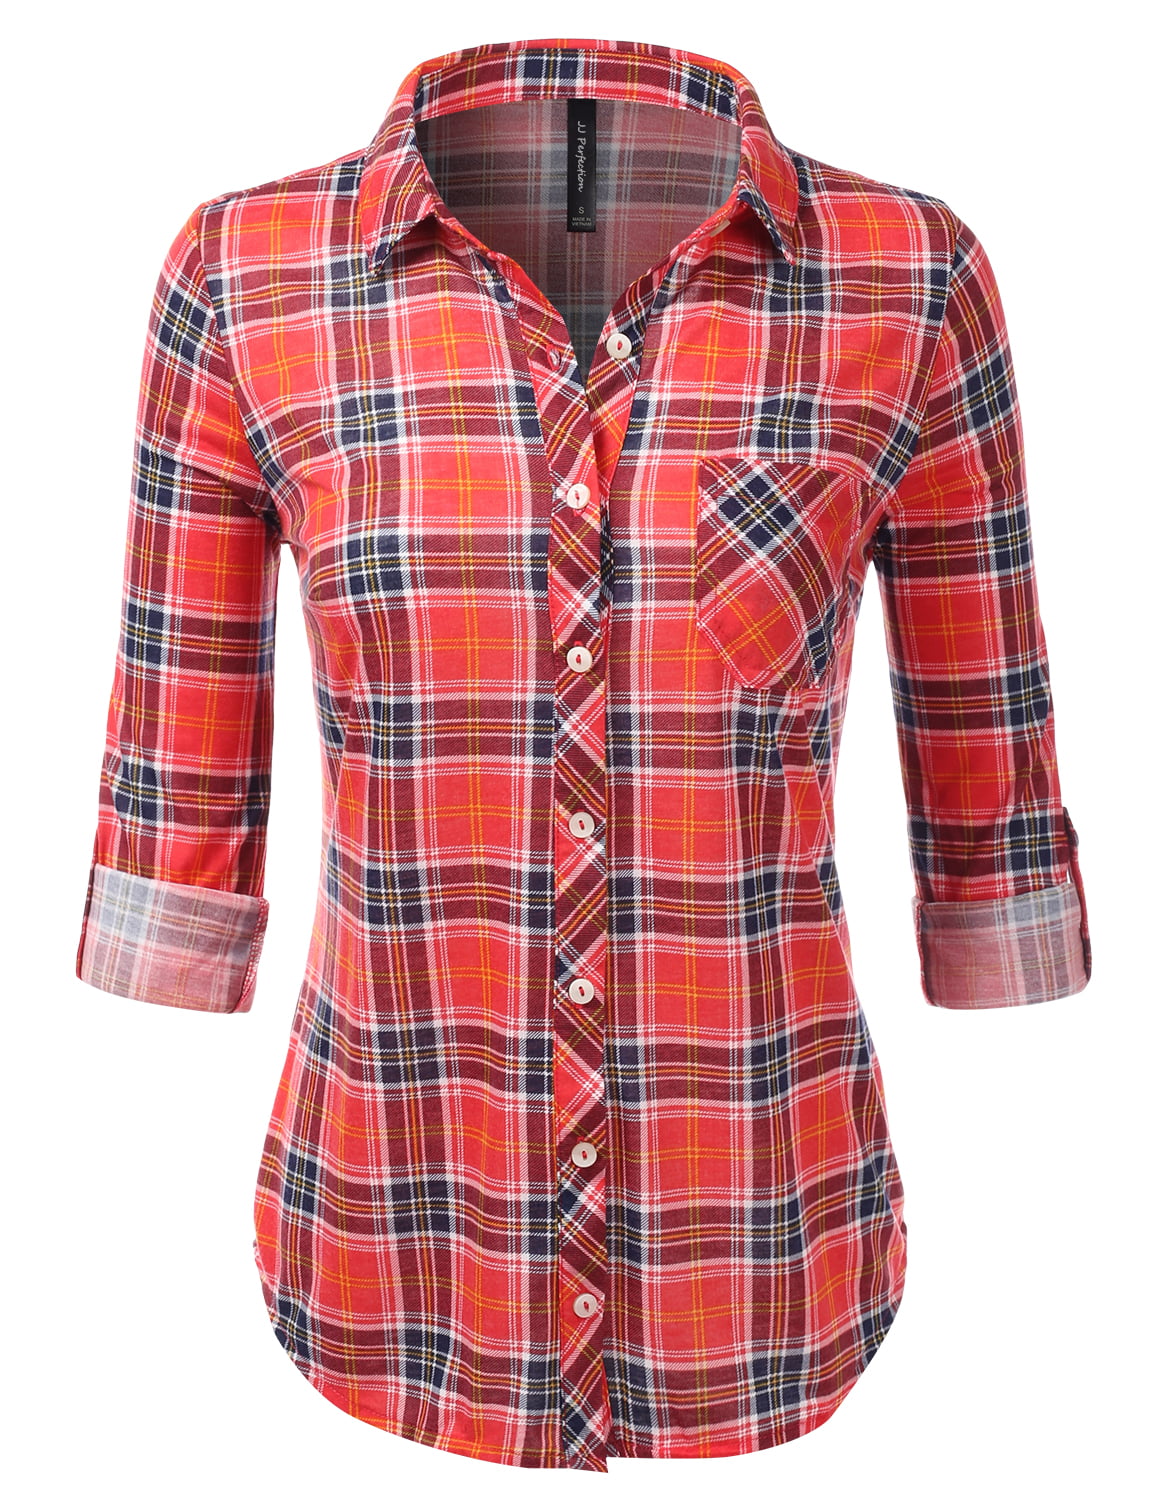 JJ Perfection - JJ Perfection Womens Long Sleeve Knit Plaid Collared ...